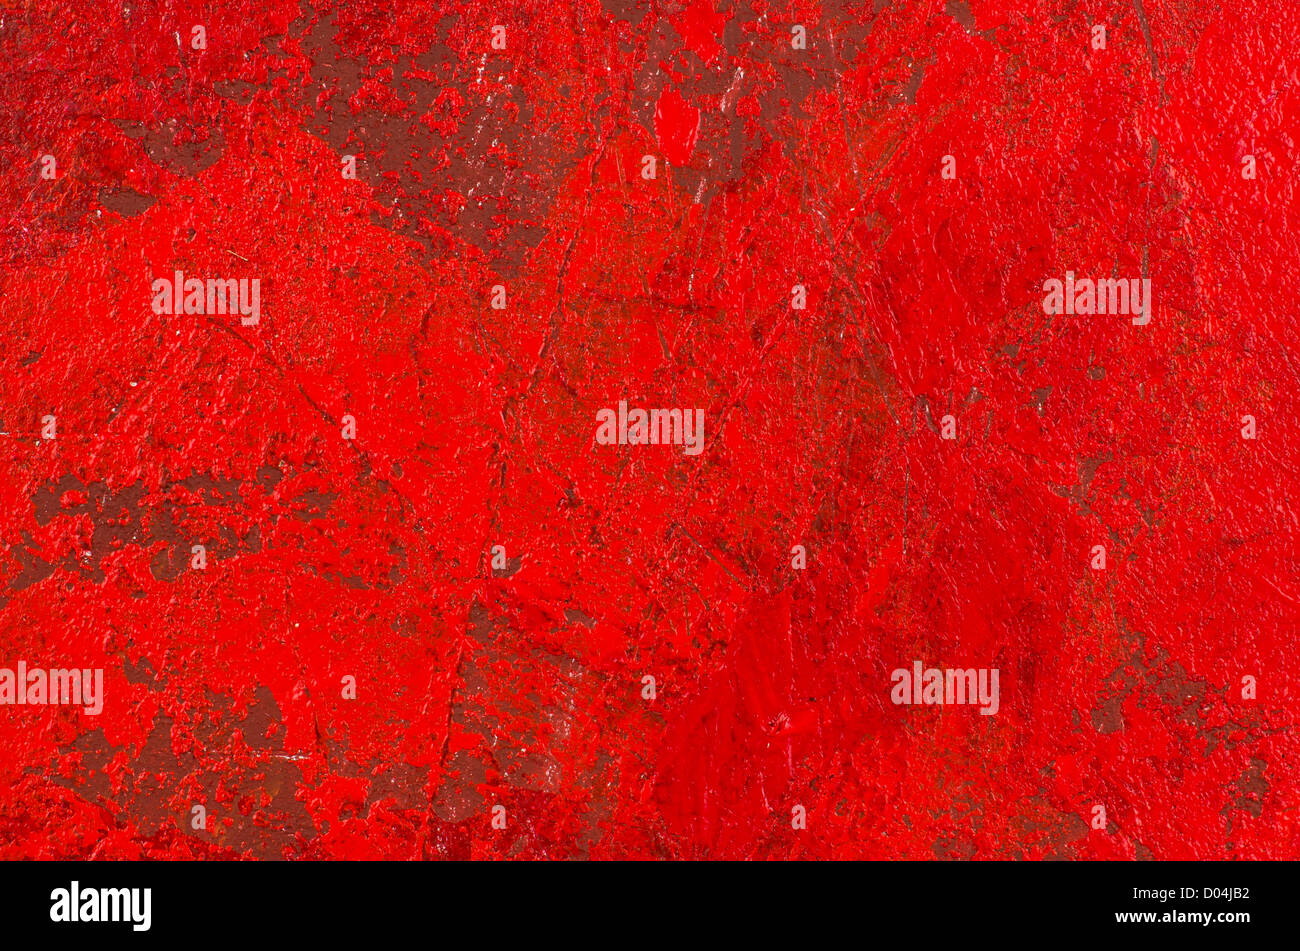 red abstract acrylic background Stock Photo